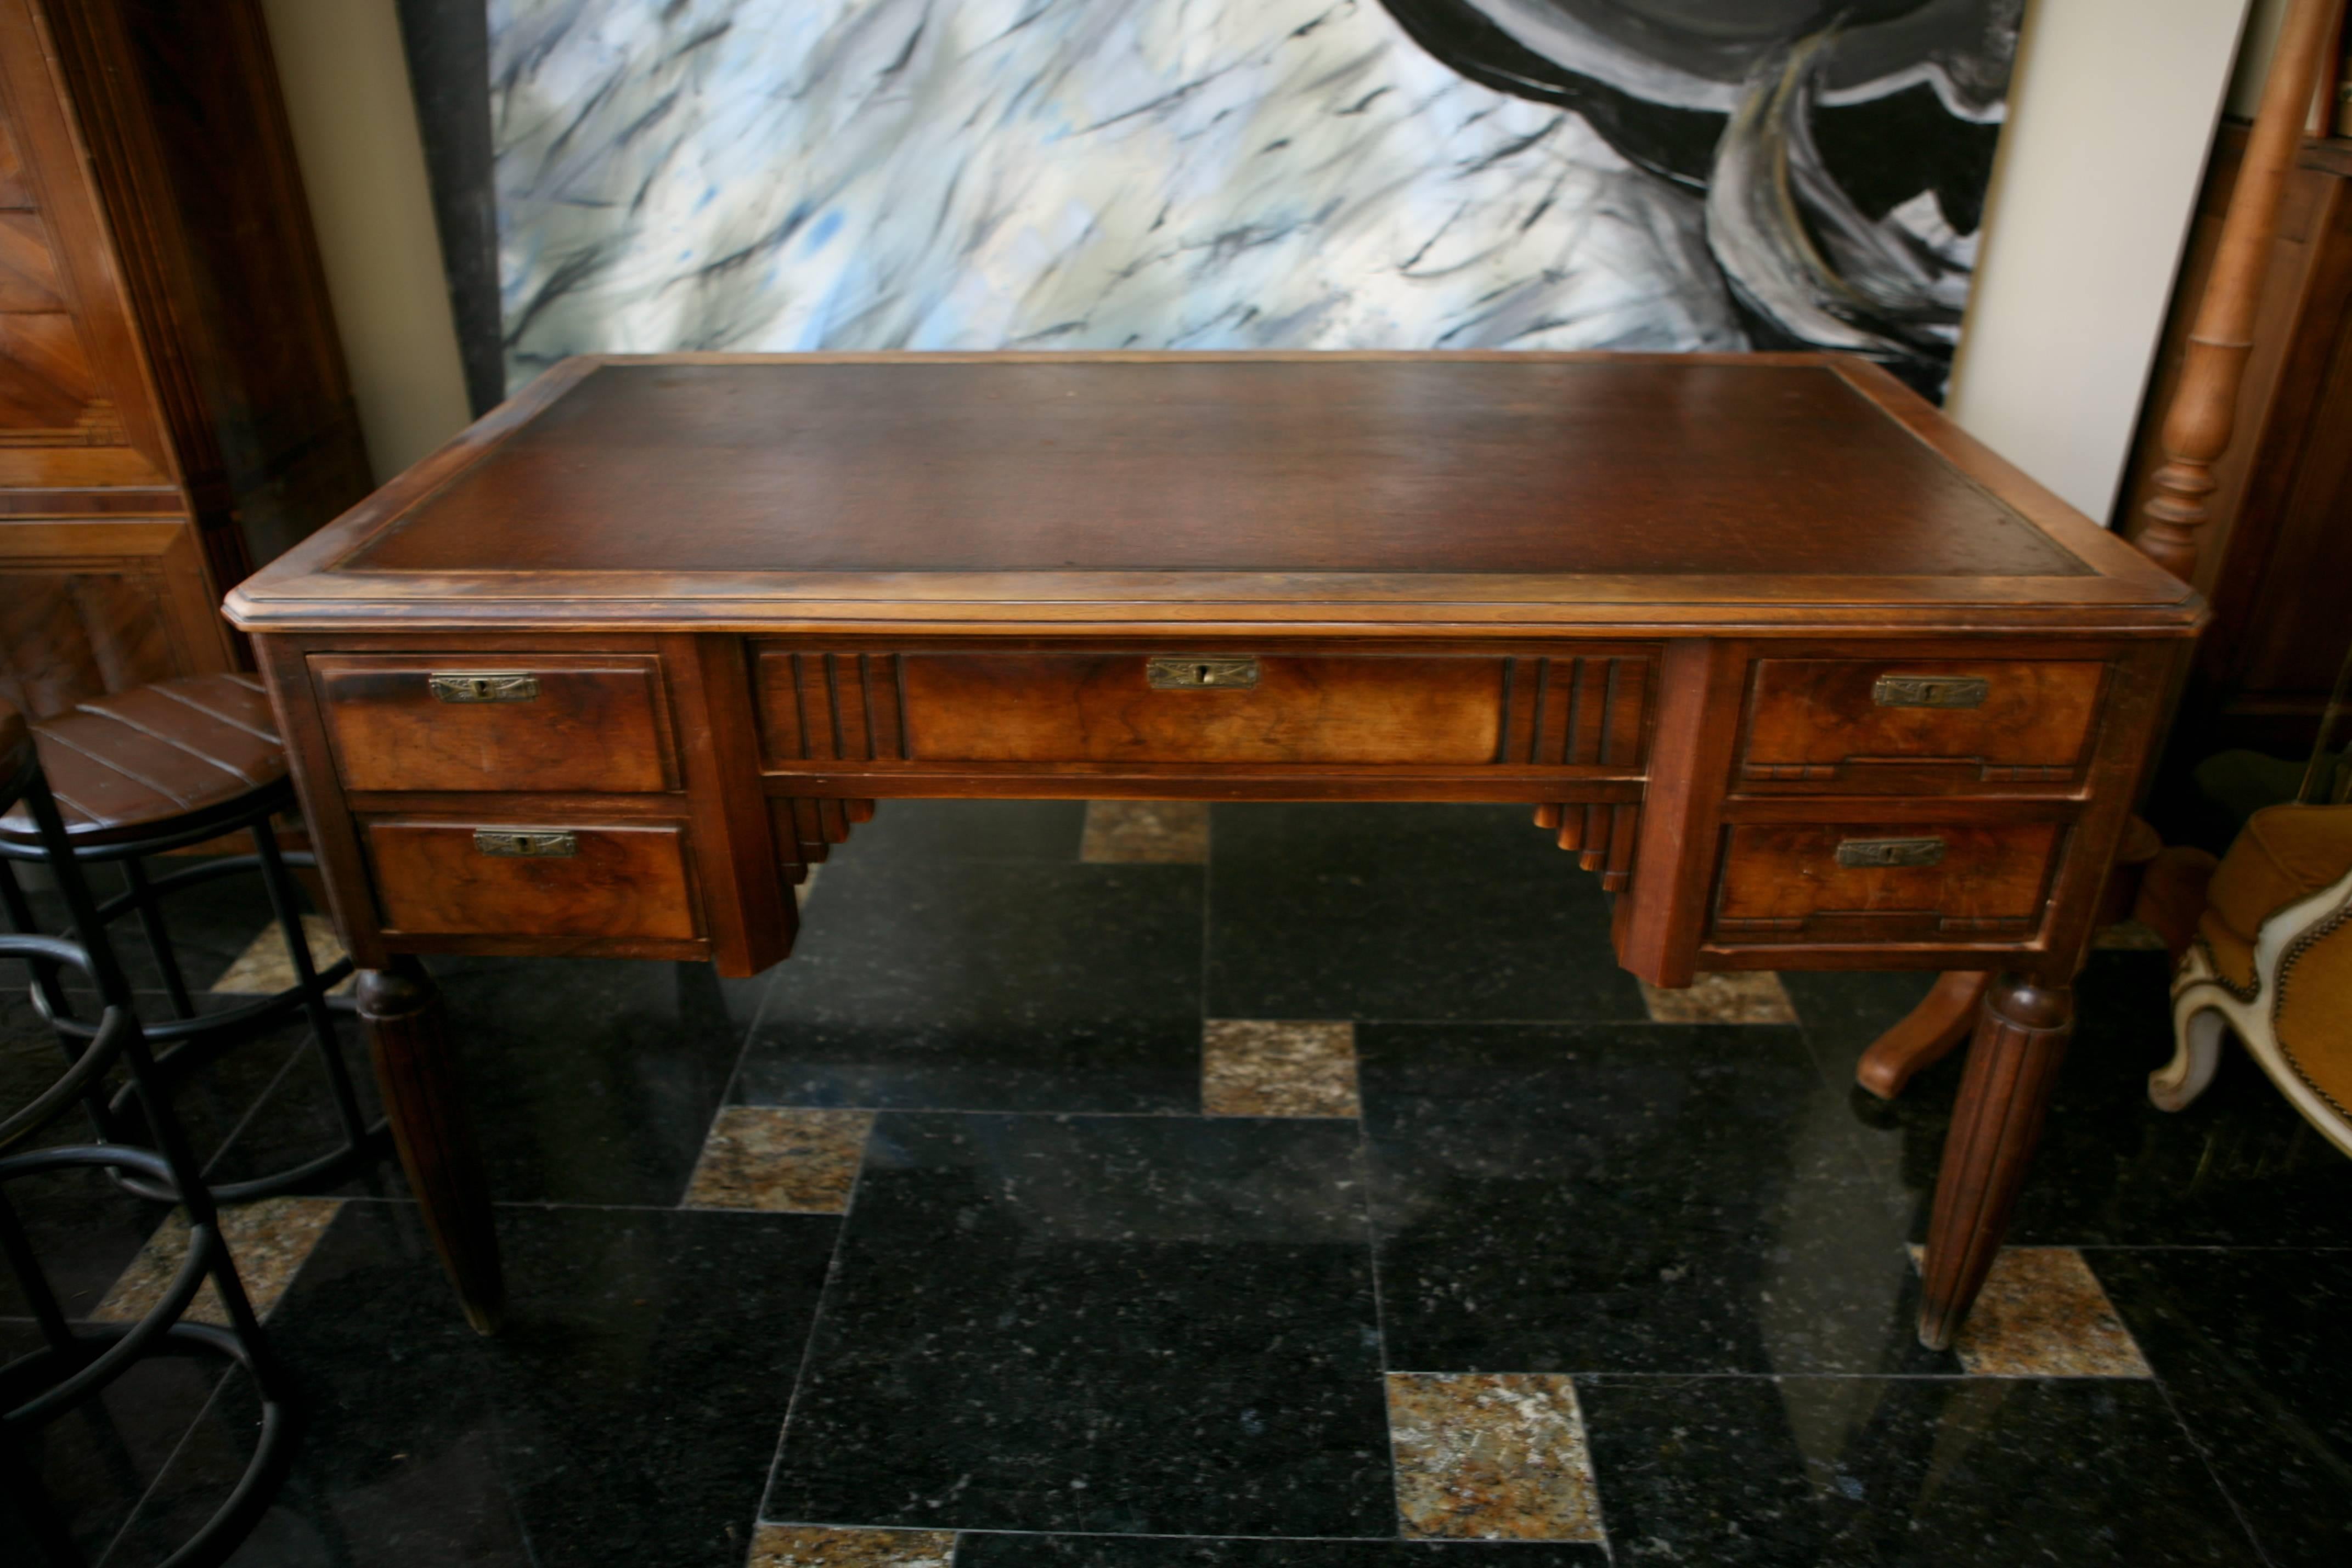 Wonderful Art Deco desk with an eye catching brown leather plate on top resting on beautifully carved legs.
France, circa 1920